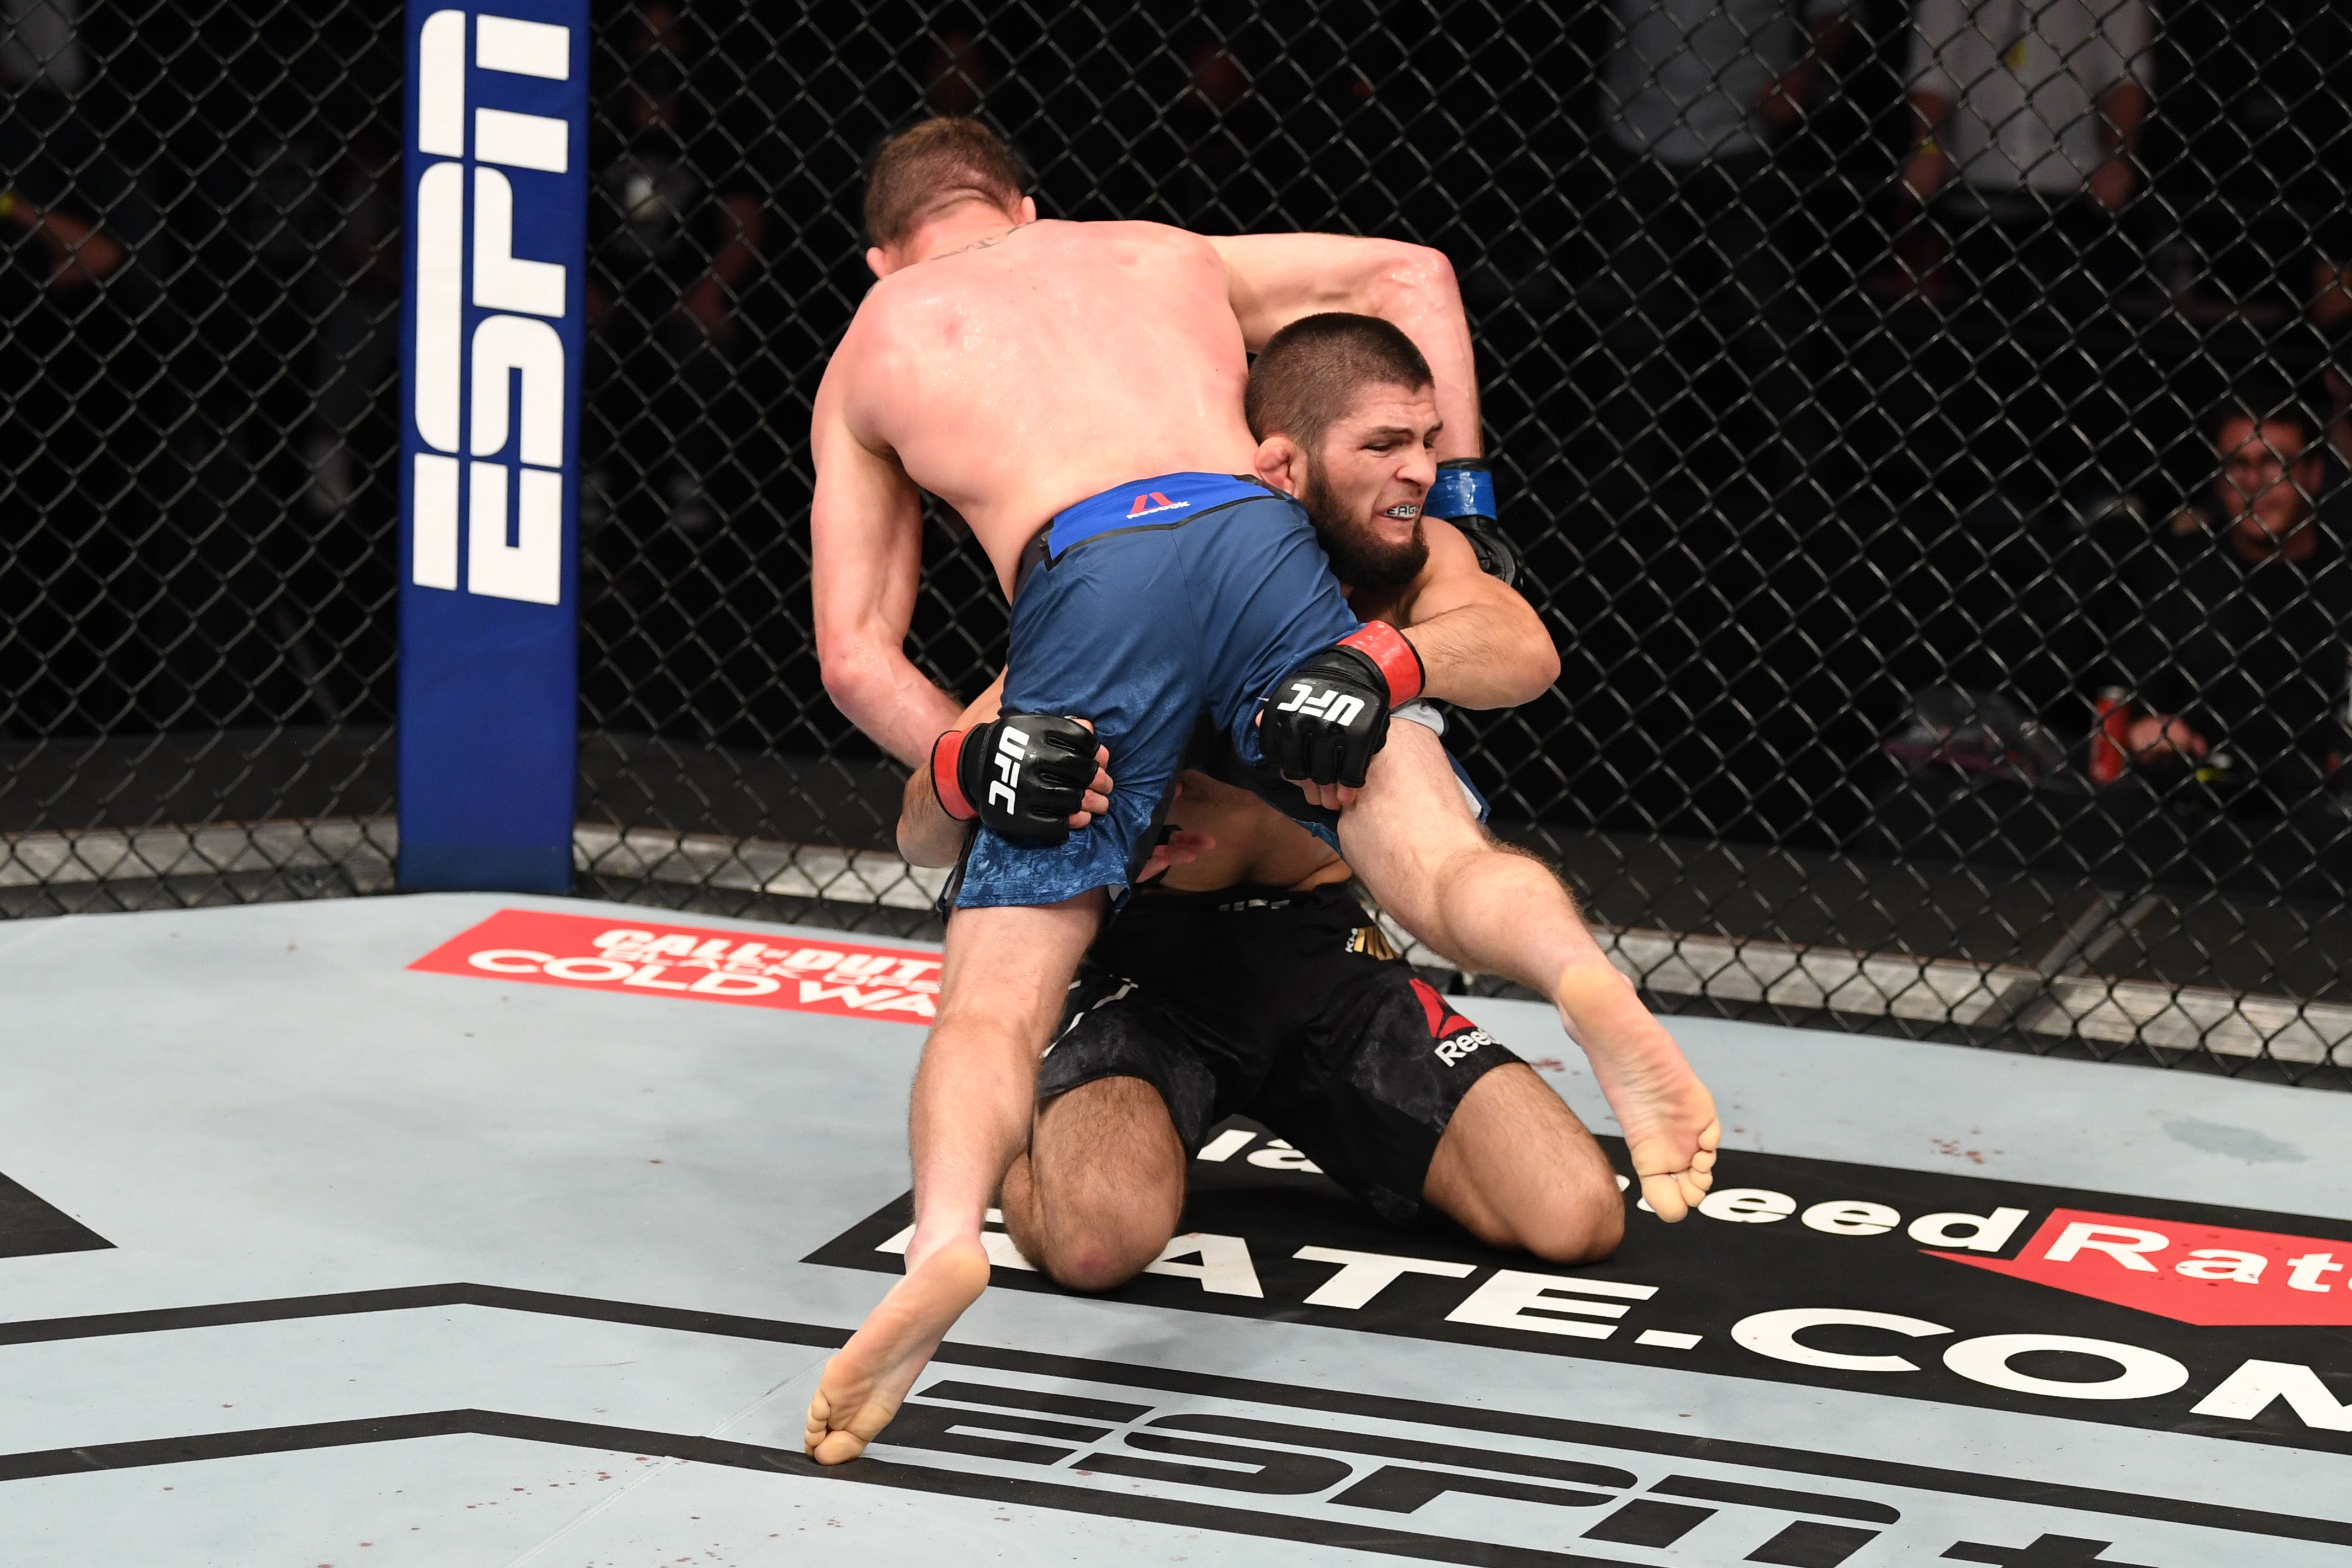 Khabib’s wrestling proved unstoppable in the Octagon throughout his UFC career